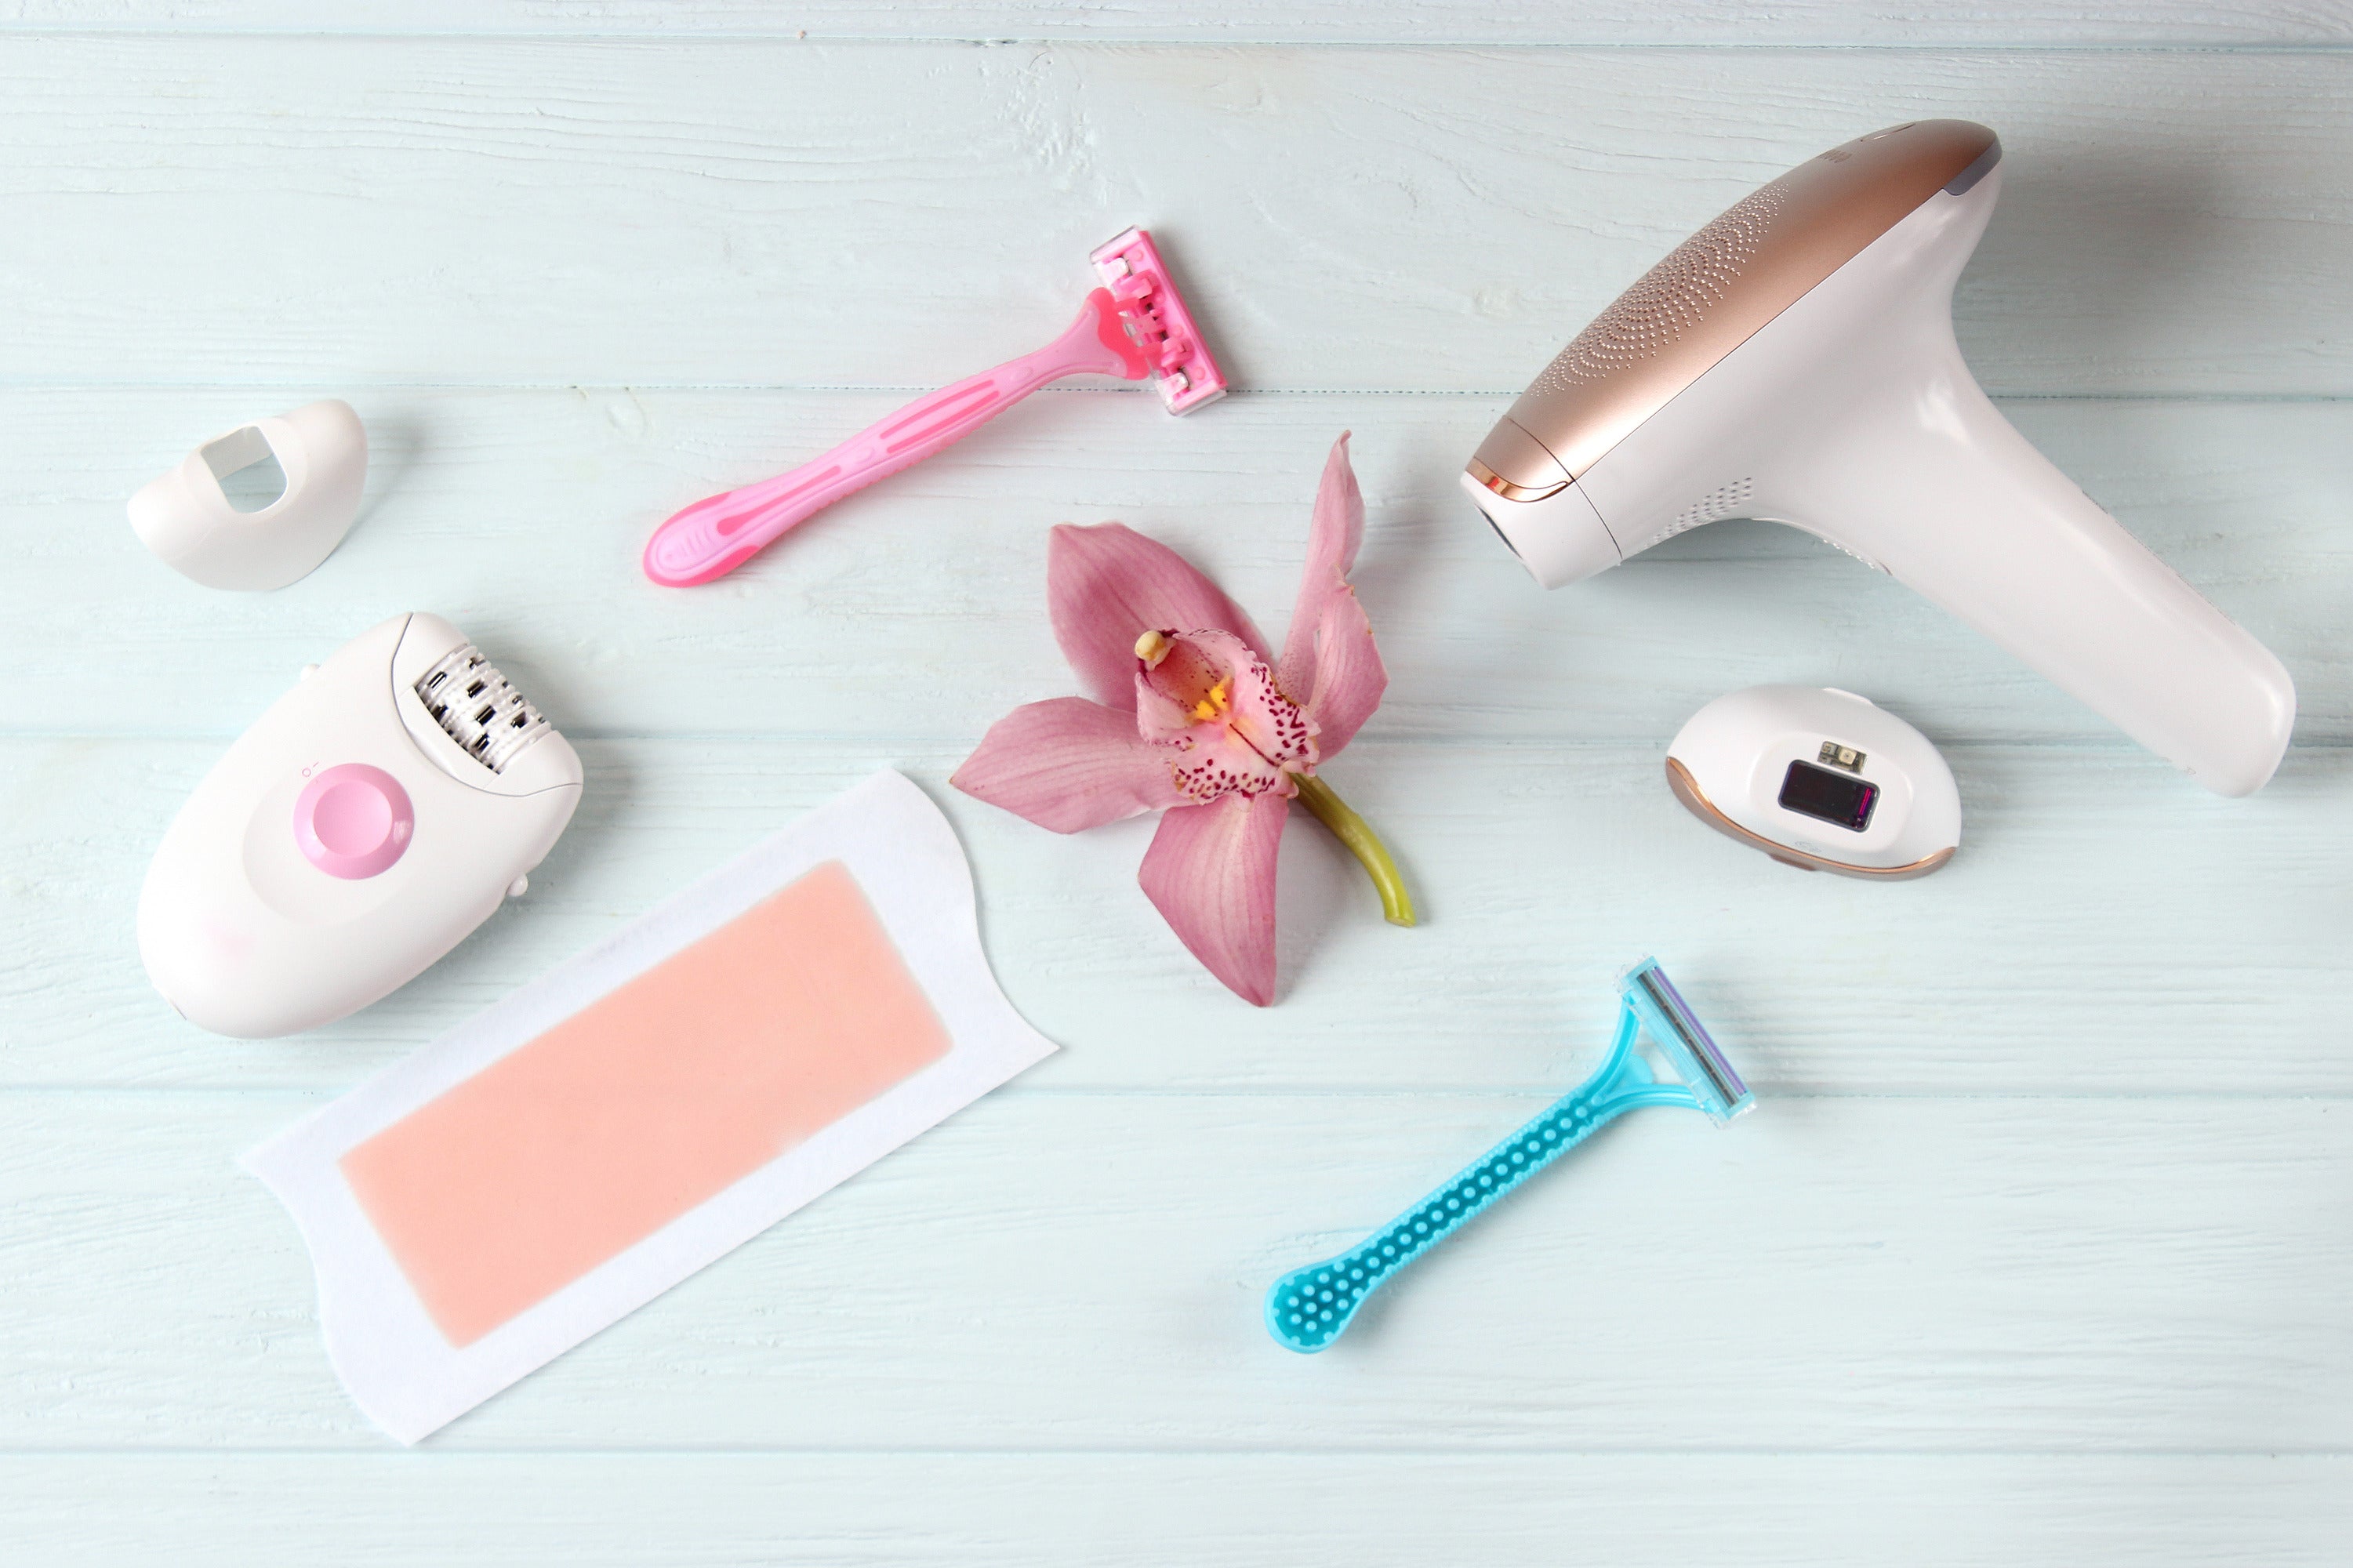 Public Hair Removal Alternatives Additional considerations